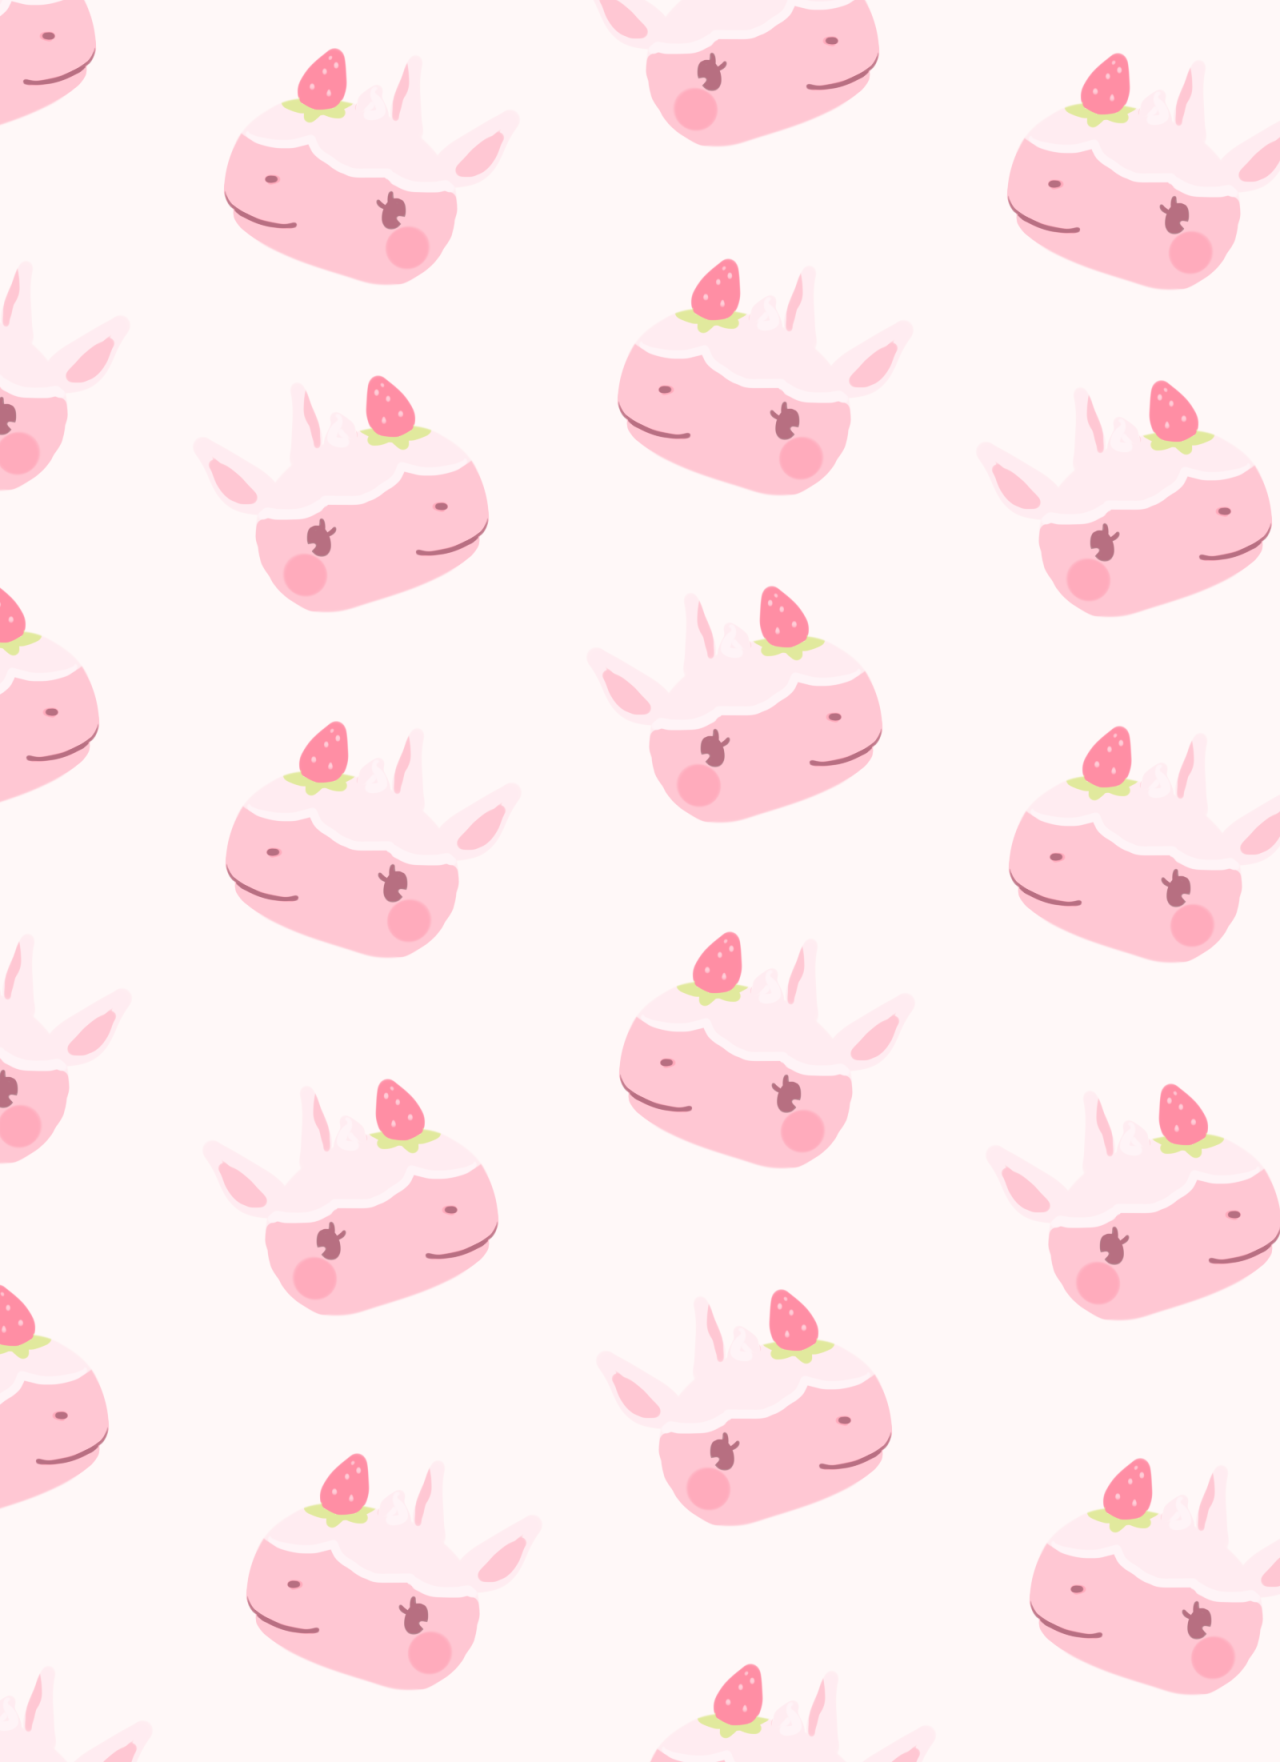 Made this bg for the MERENGUE PIC but it was too overwhelming but I thought it loo. Animal crossing fan art, Animal crossing characters, Animal crossing villagers